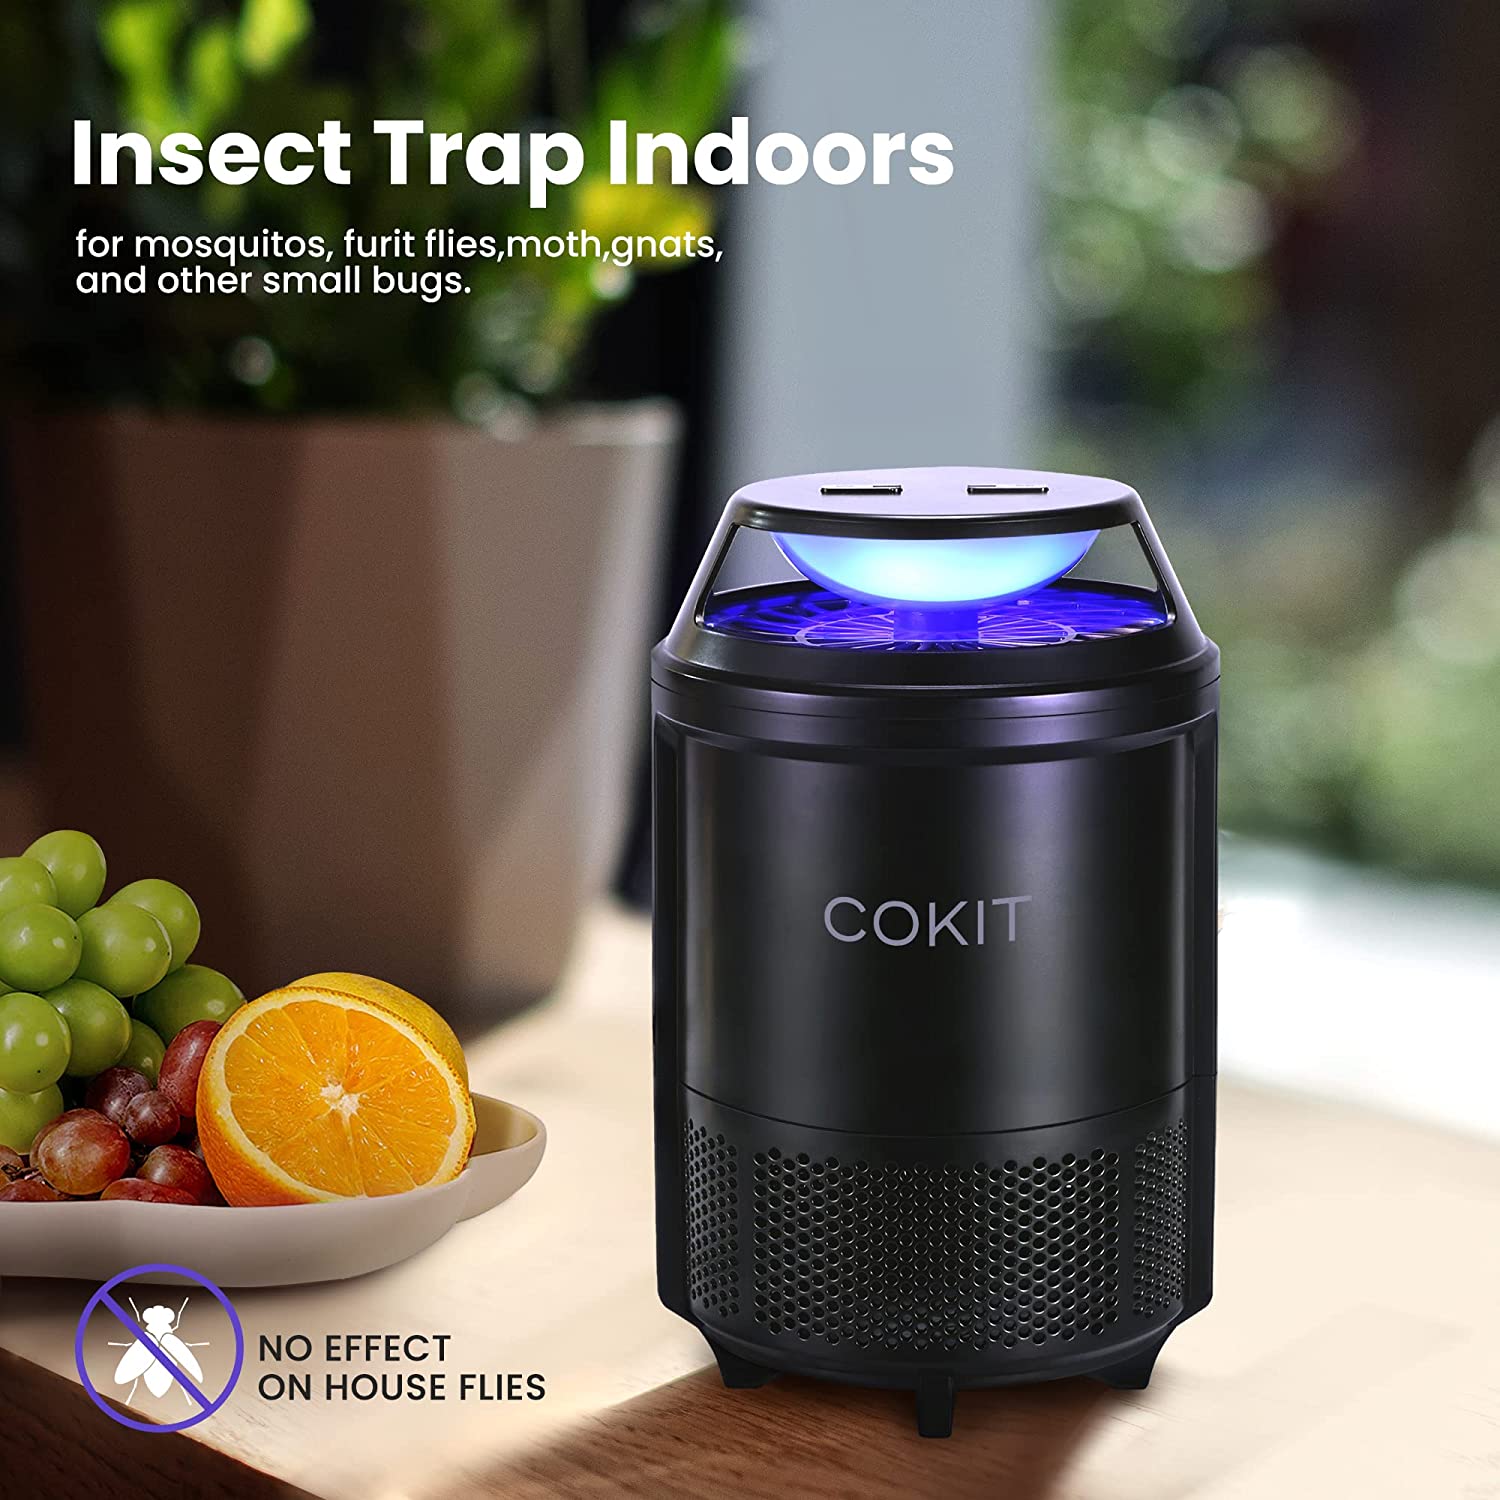 Aspectek Sticky Fly Insect Trap for Indoor, Plug-in Blue Light Bug Tra